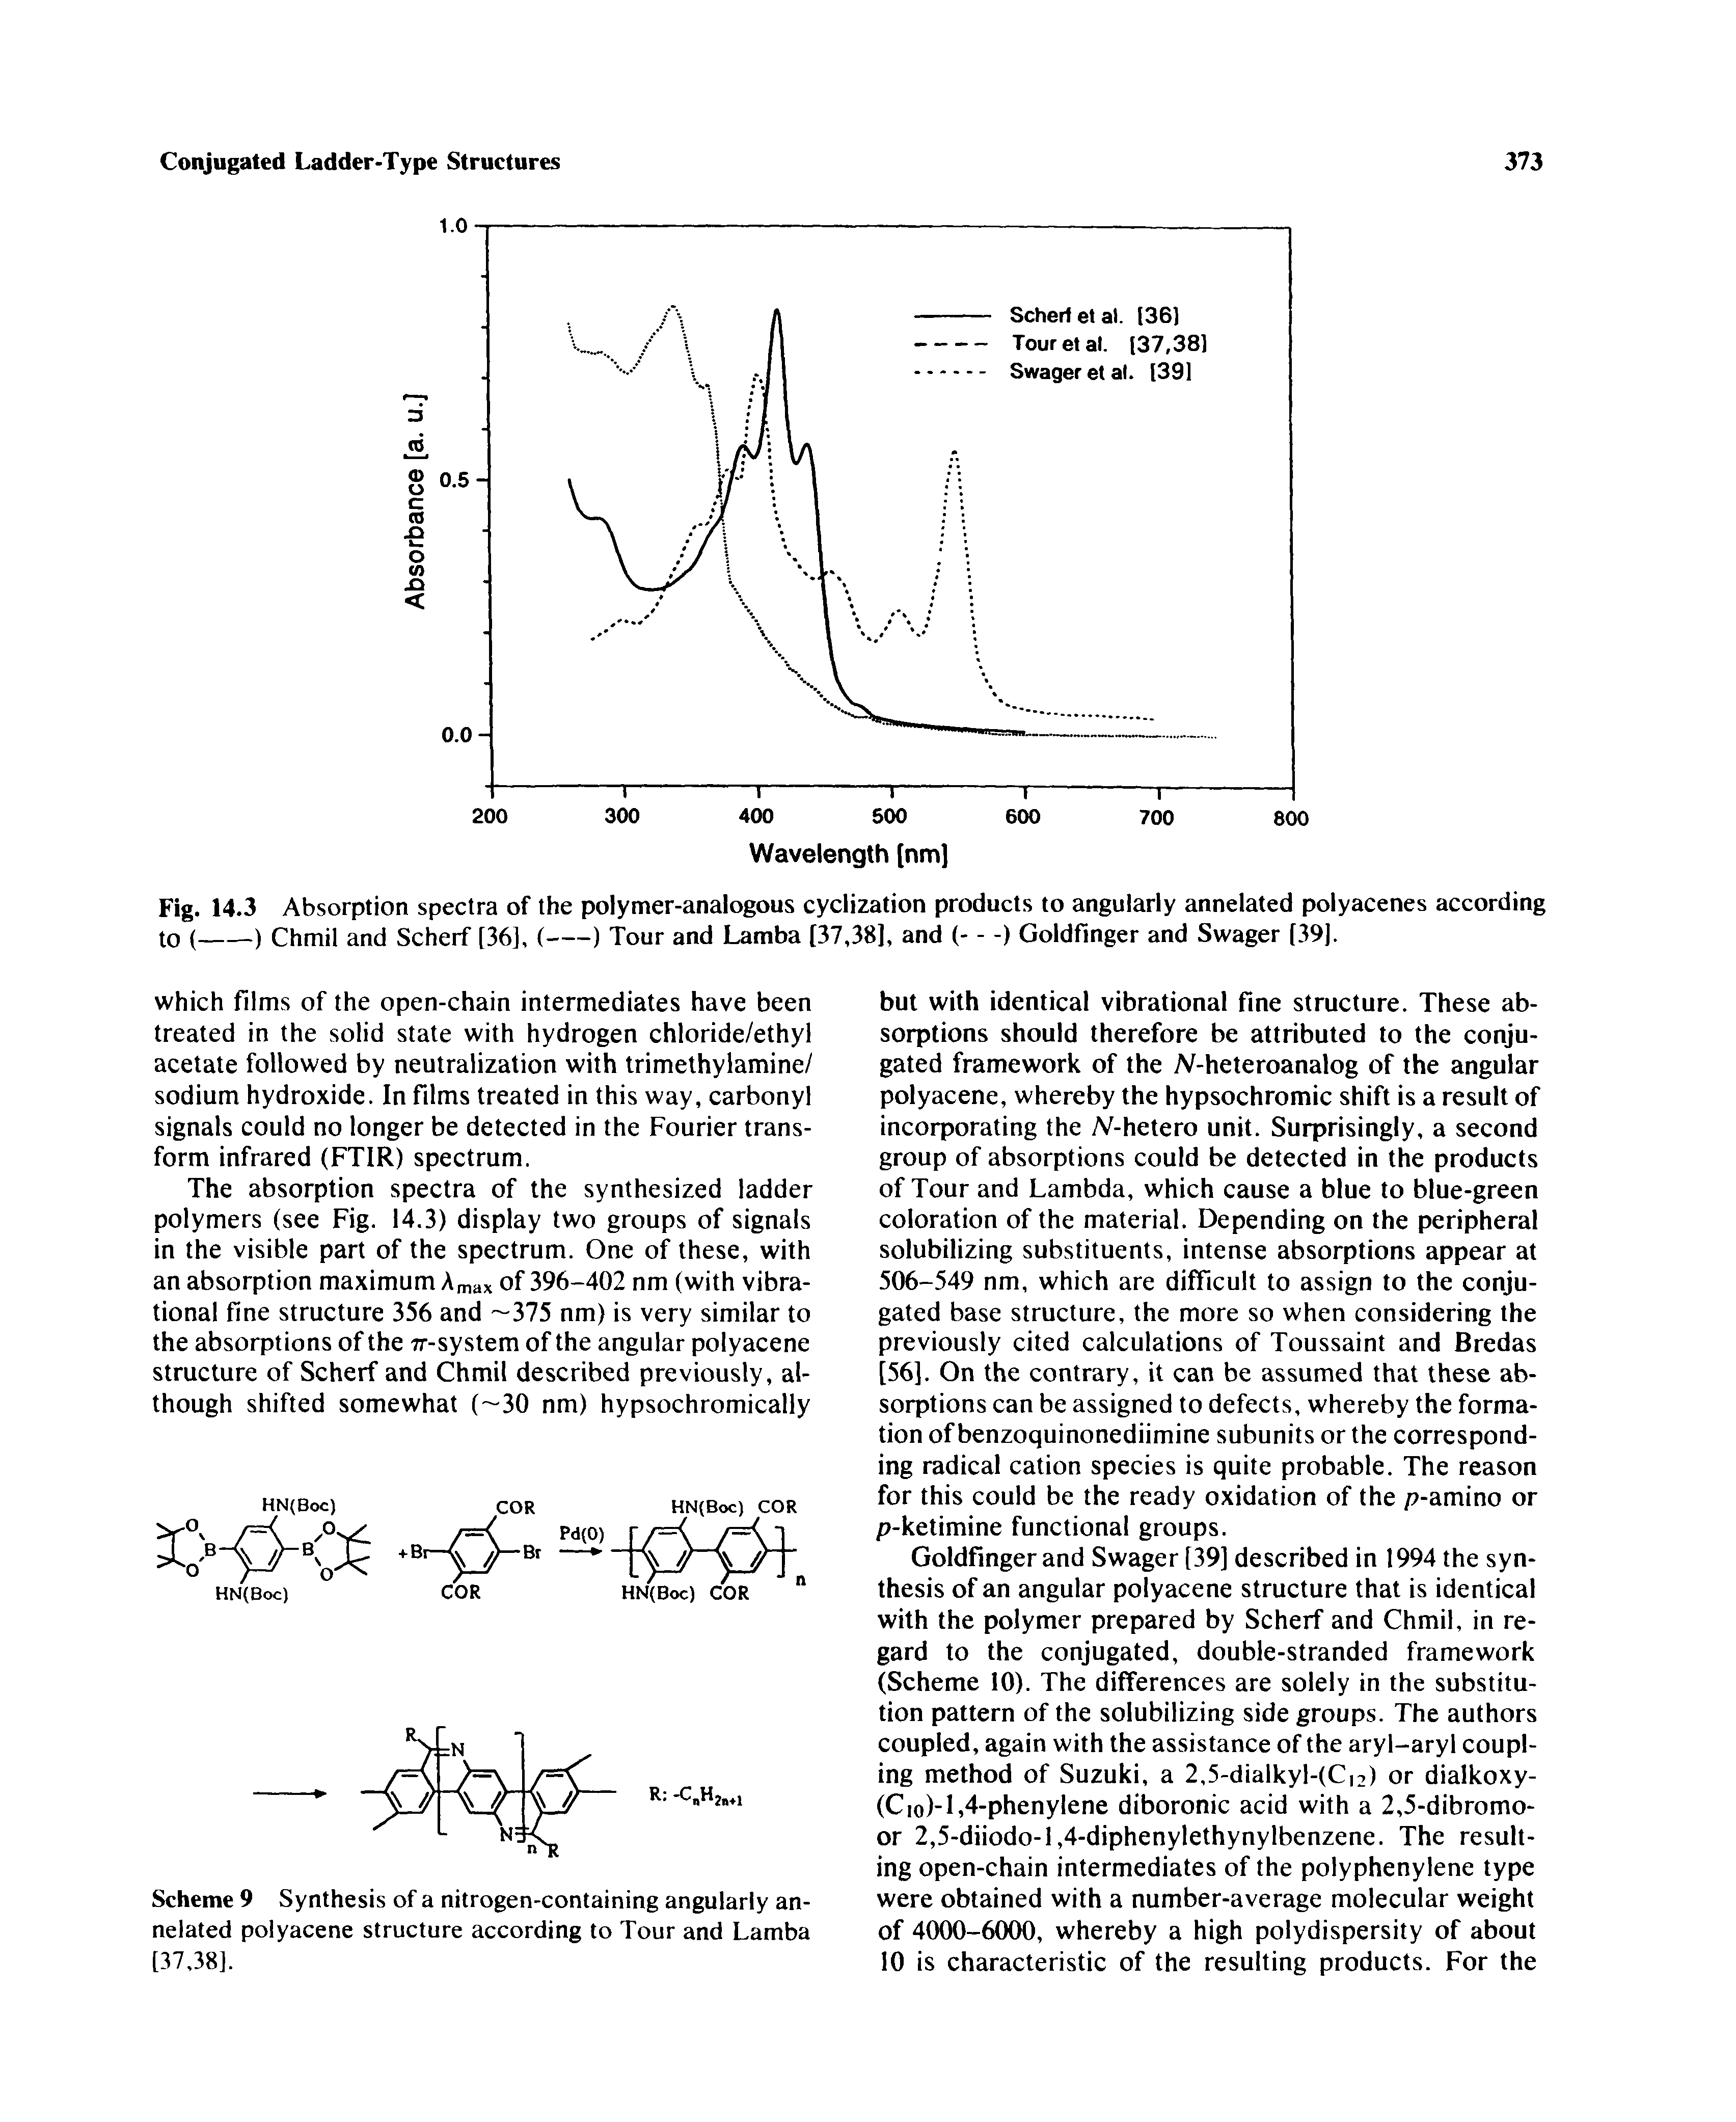 Fig. 14.3 Absorption spectra of the polymer-analogous cyclization products to angularly annelated polyacenes according to ---) Chmil and Scherf [36], (-) Tour and Lamba [37,38], and (- - -) Goldfinger and Swager [39].